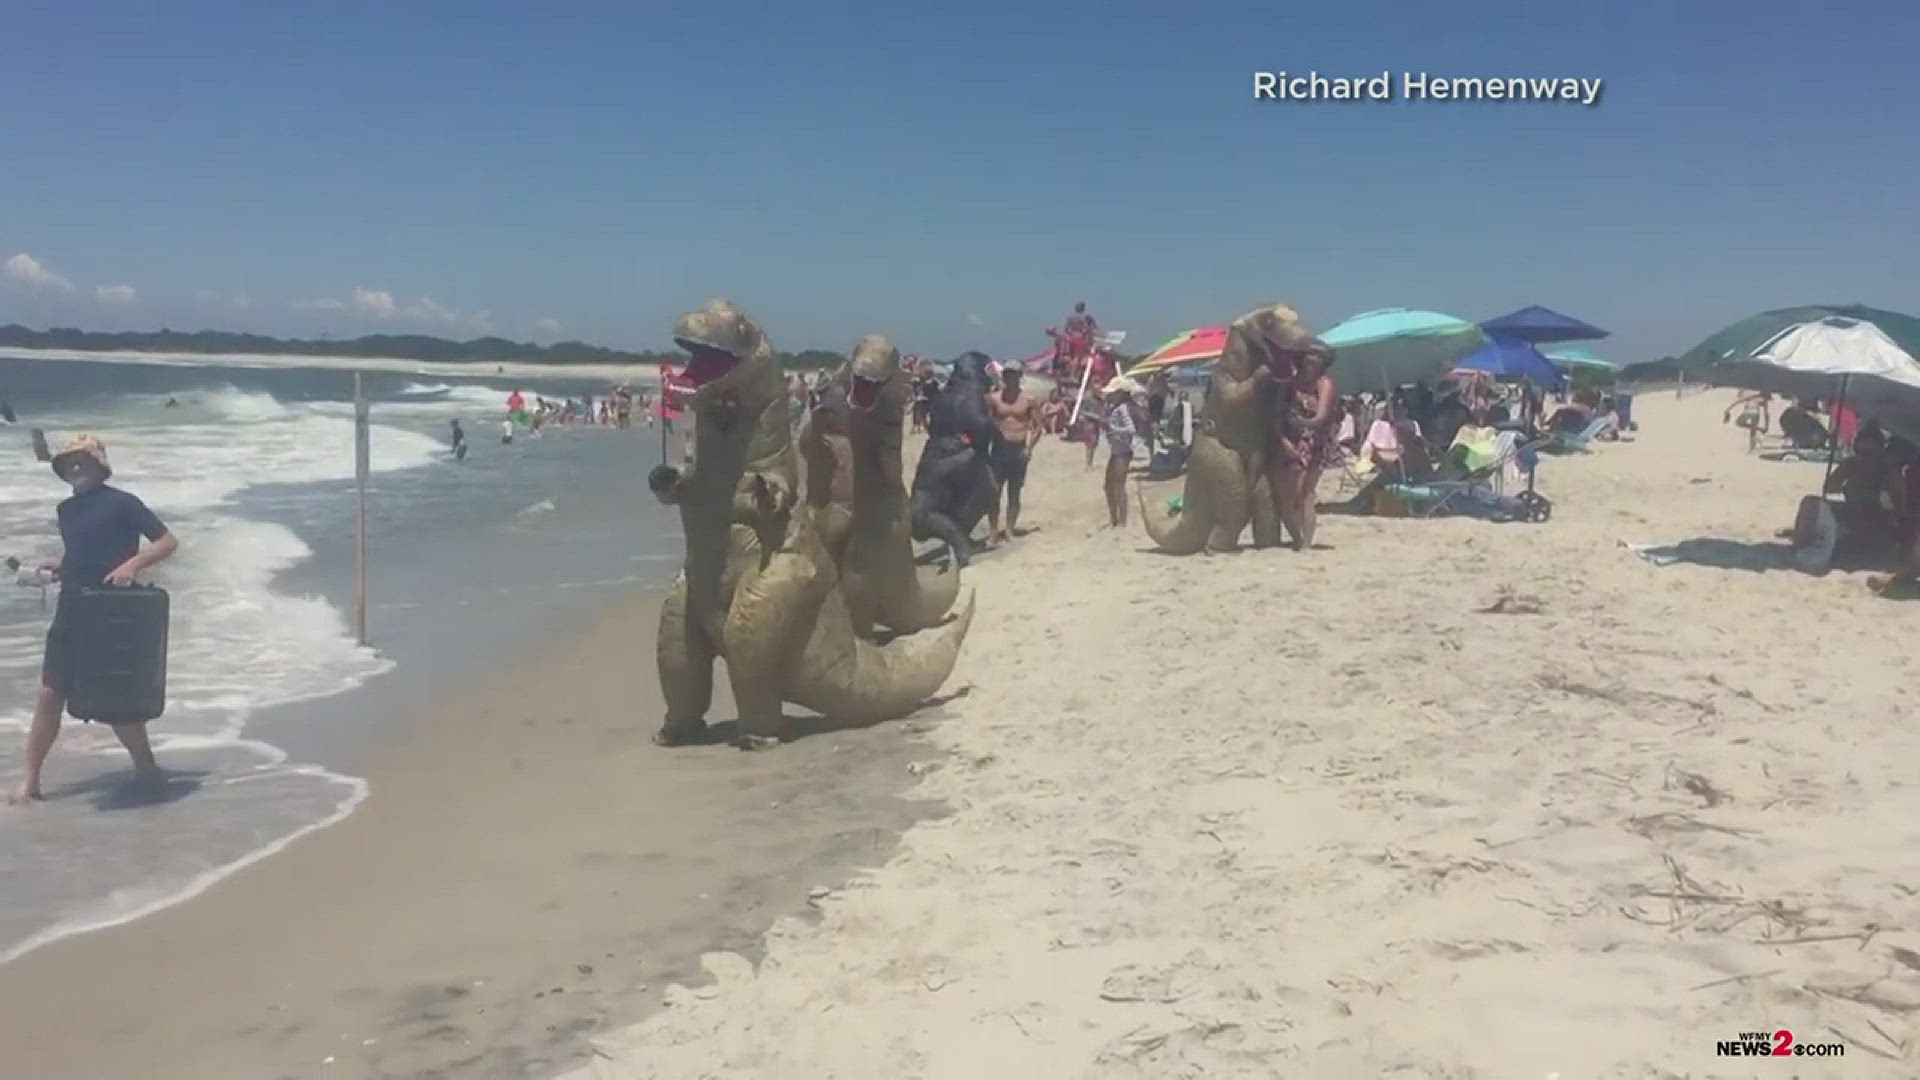 Check out these dancing beach dinosaurs found on Cape May in NJ